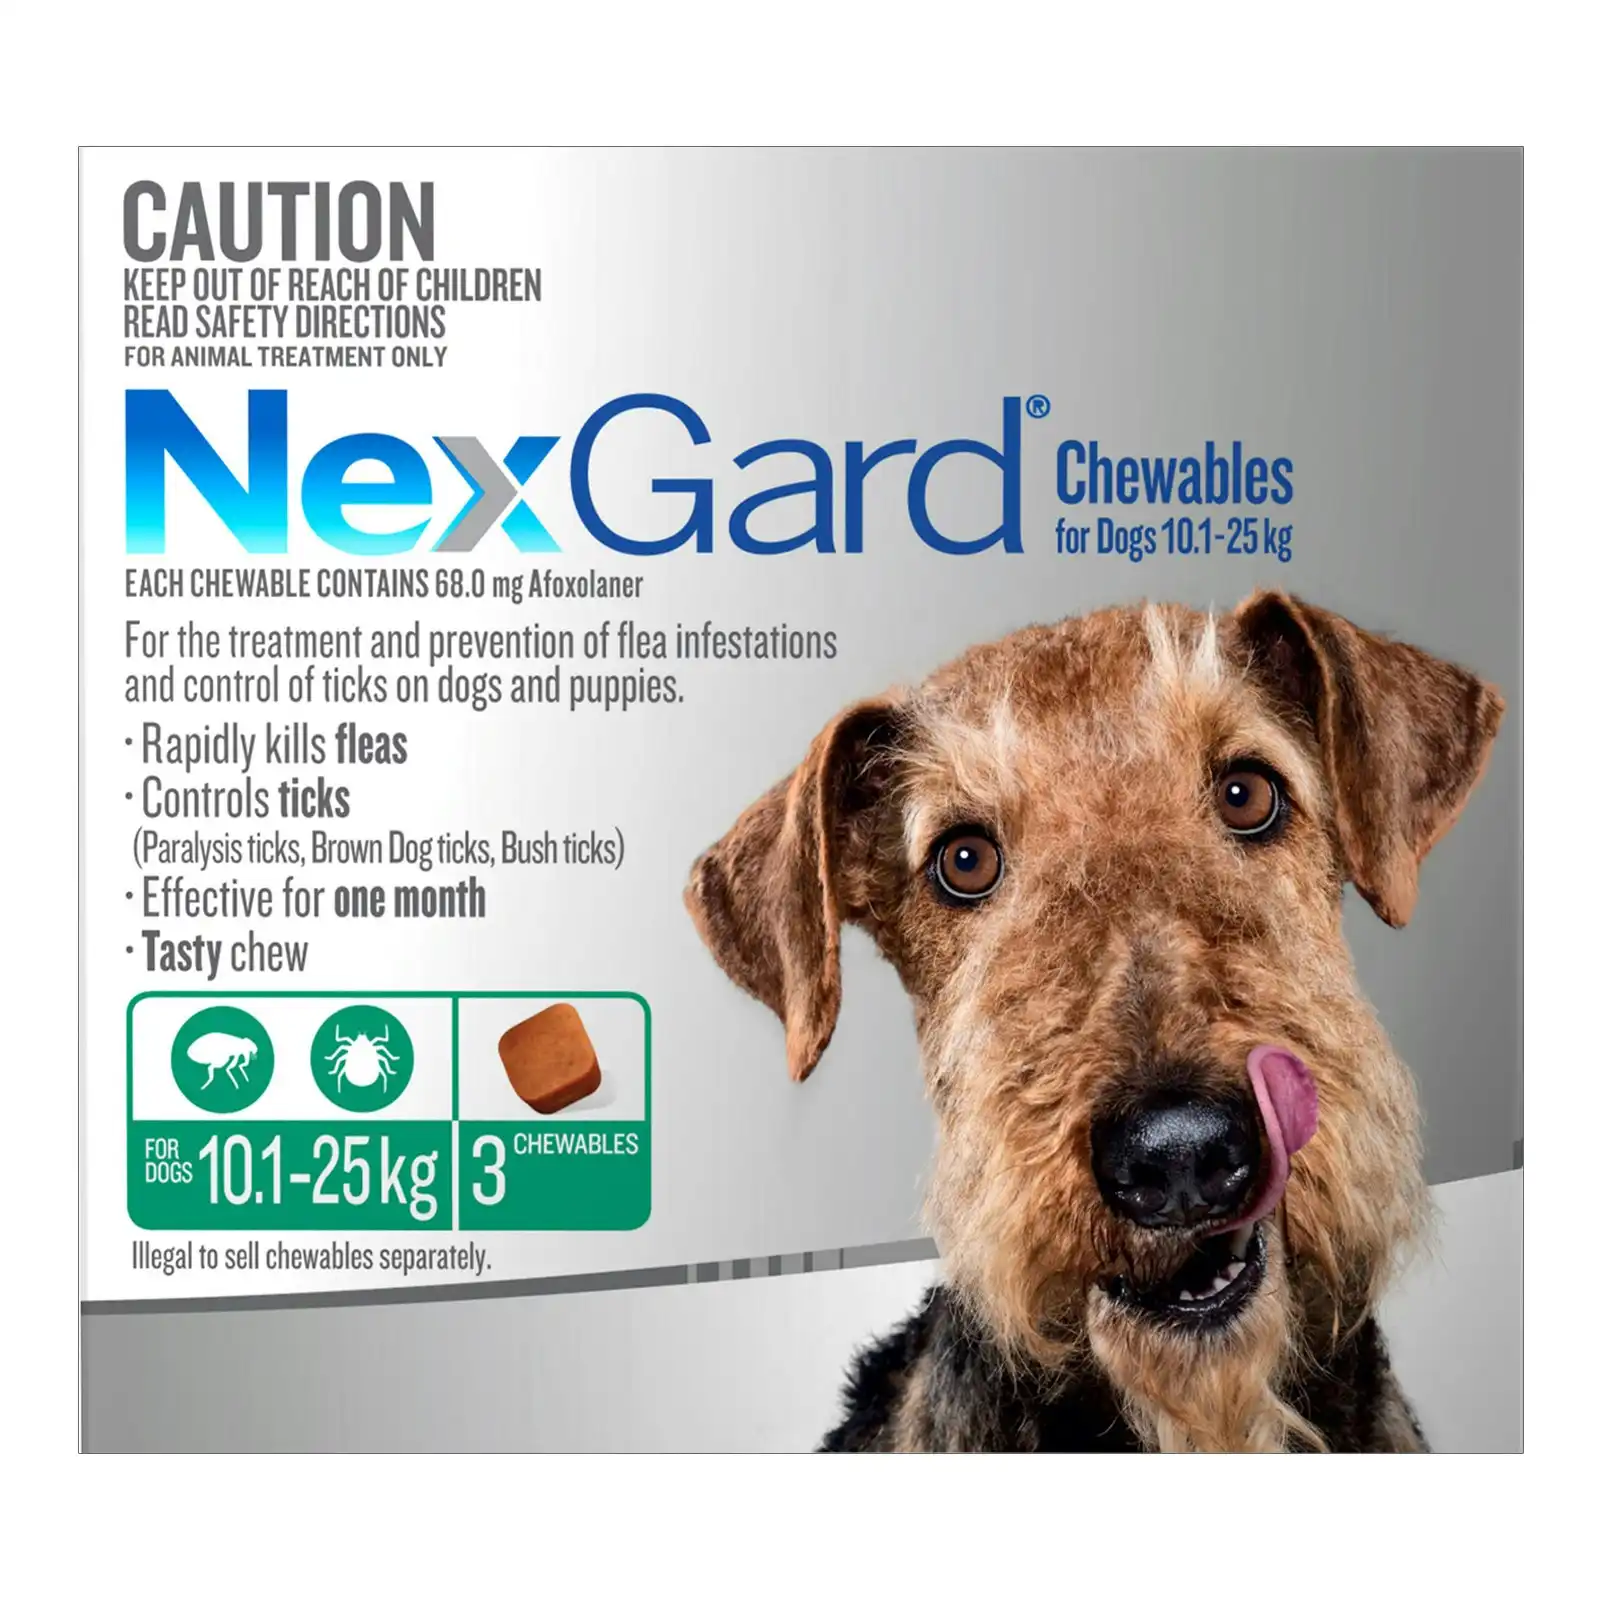 Nexgard Chewables For Dogs 10.1 - 25 Kg (Green) 3 Chews